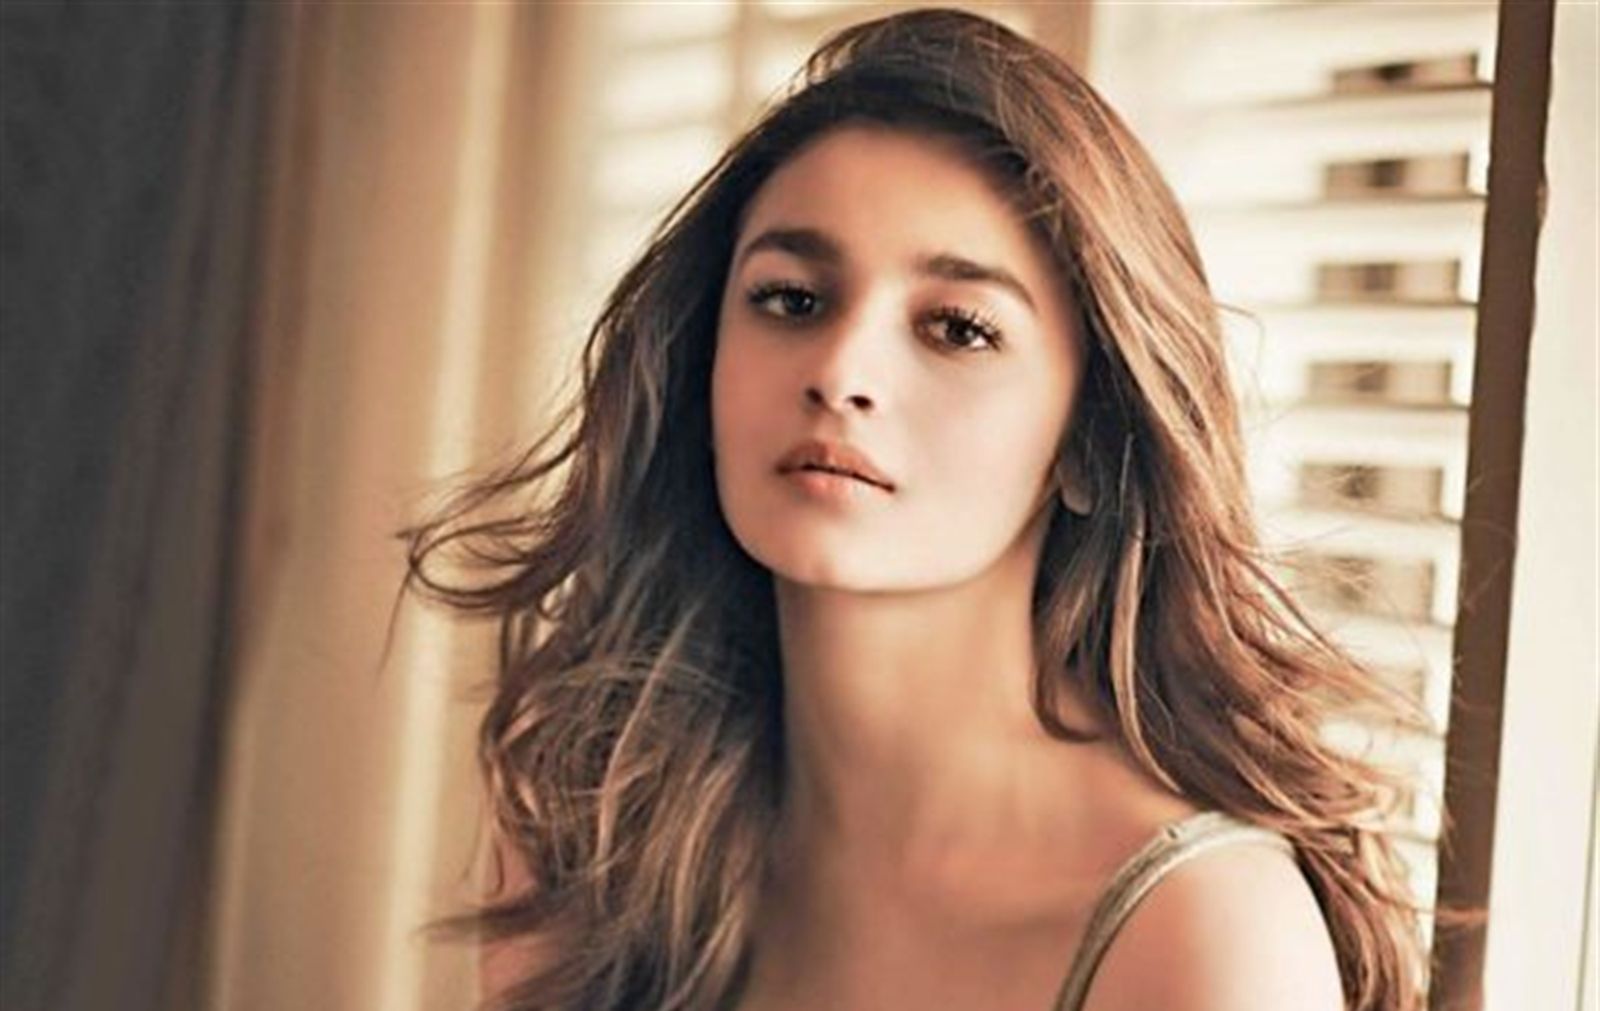 Alia Bhatt To Star In A Humourous Social Drama Next, To Be Helmed By Saket Chaudhary? Read Details…